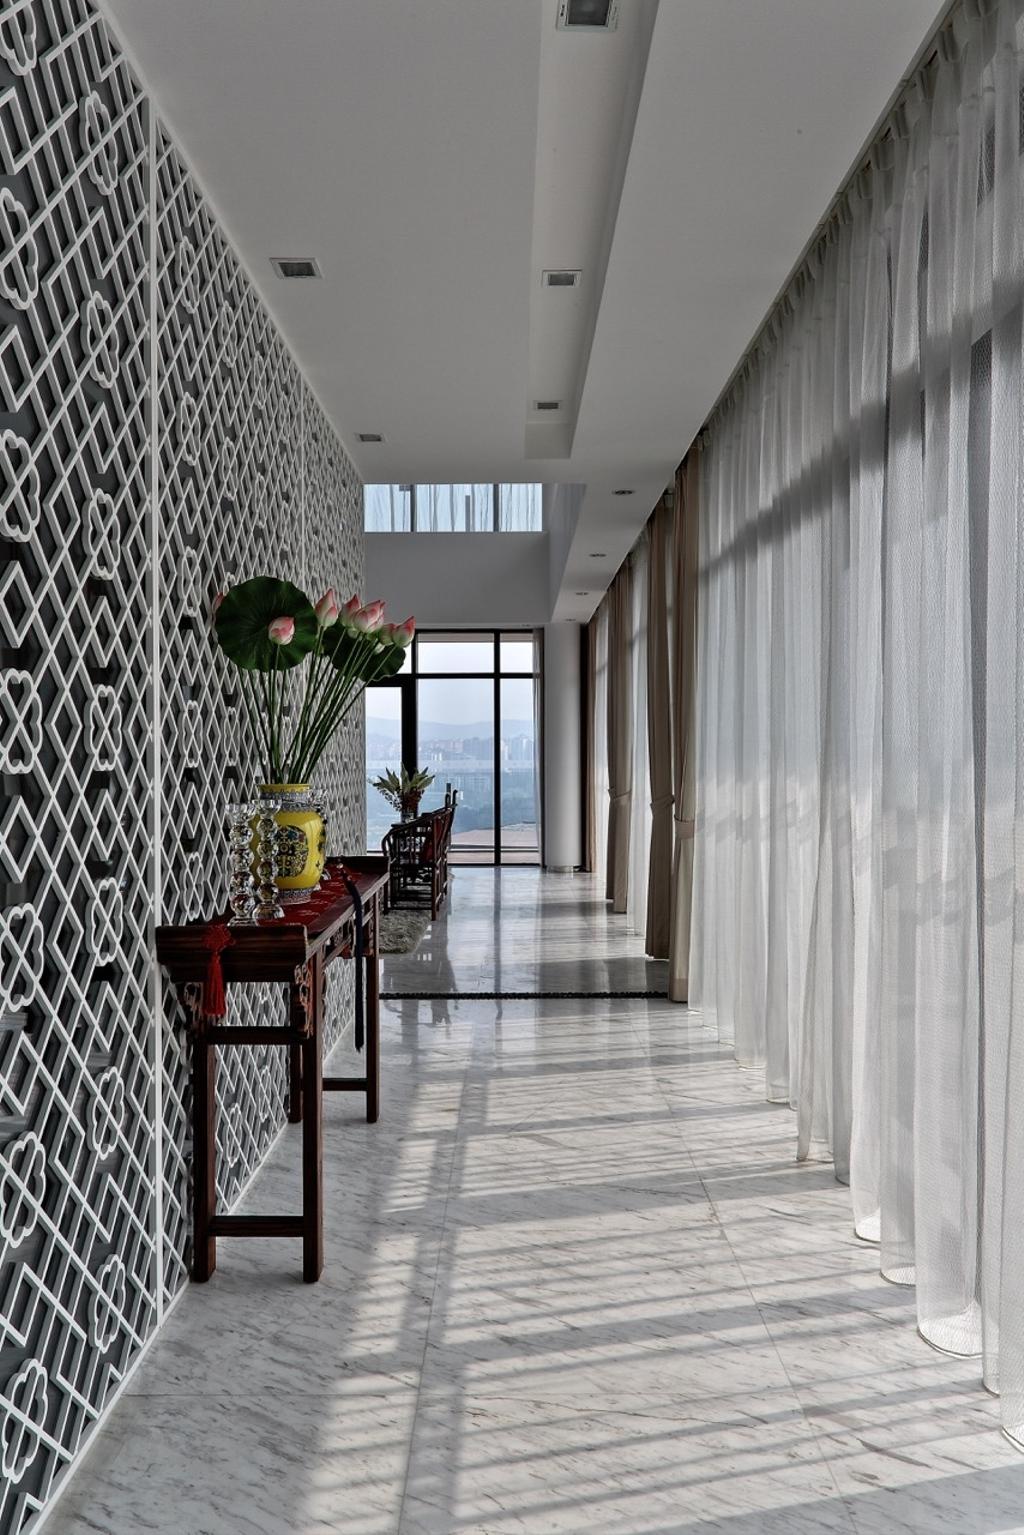 Traditional, Landed, Nanhu Golf Villa, Architect, EZRA Architects, White Marble Floor, Marble Tiles, Decorative Panels, Wooden Display Cabinet, Display Shelf, Curtains, False Ceiling, Recessed Lights, Full Length Window, Flora, Jar, Plant, Potted Plant, Pottery, Vase